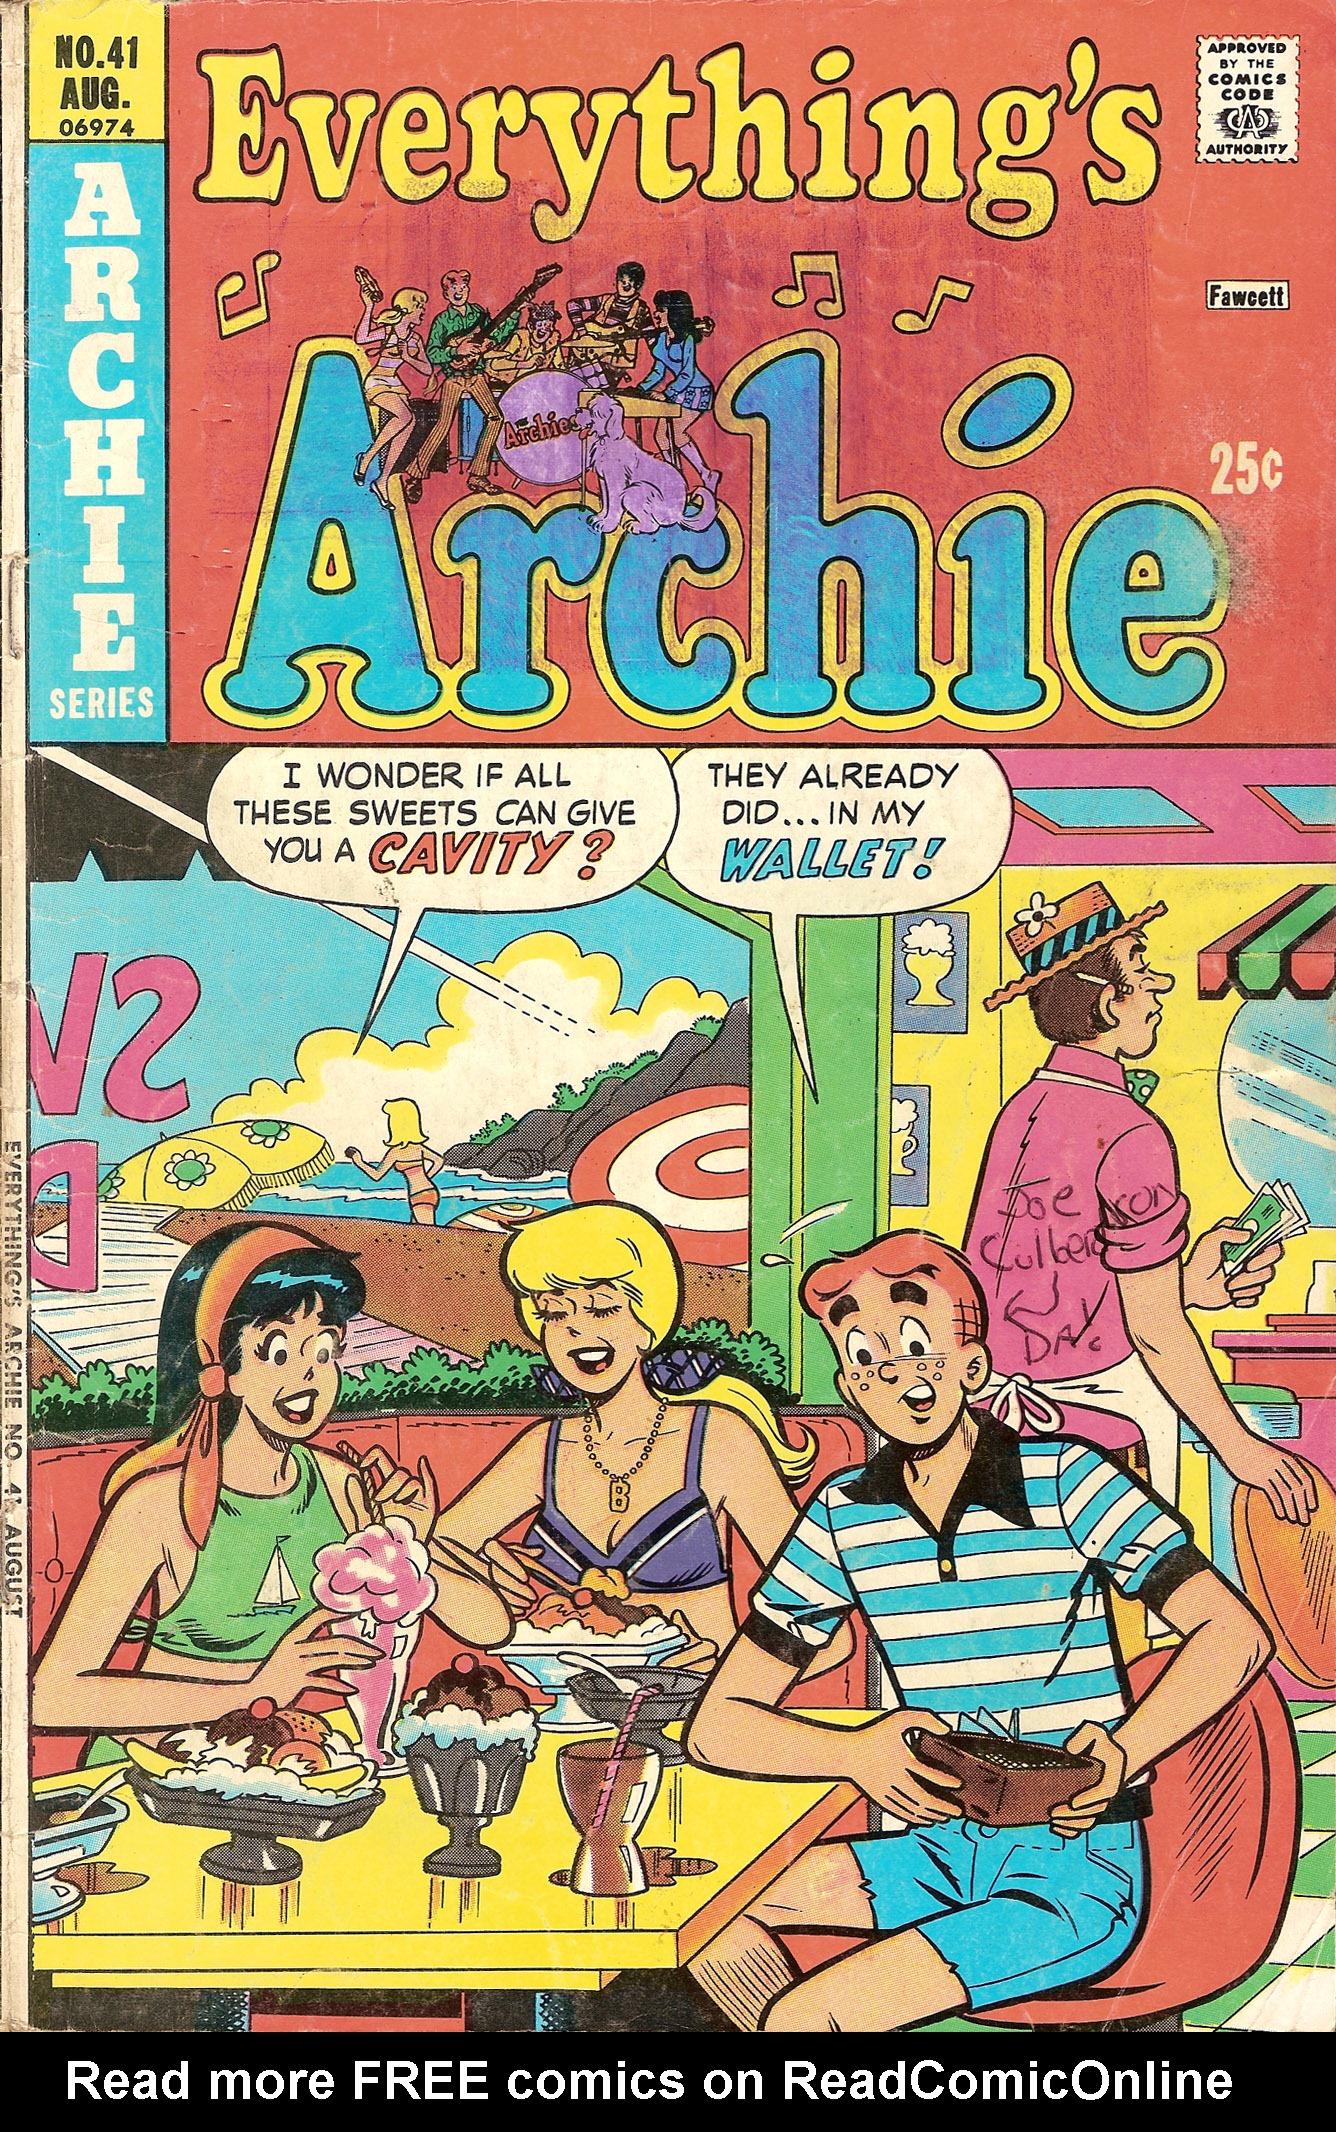 Read online Everything's Archie comic -  Issue #41 - 1